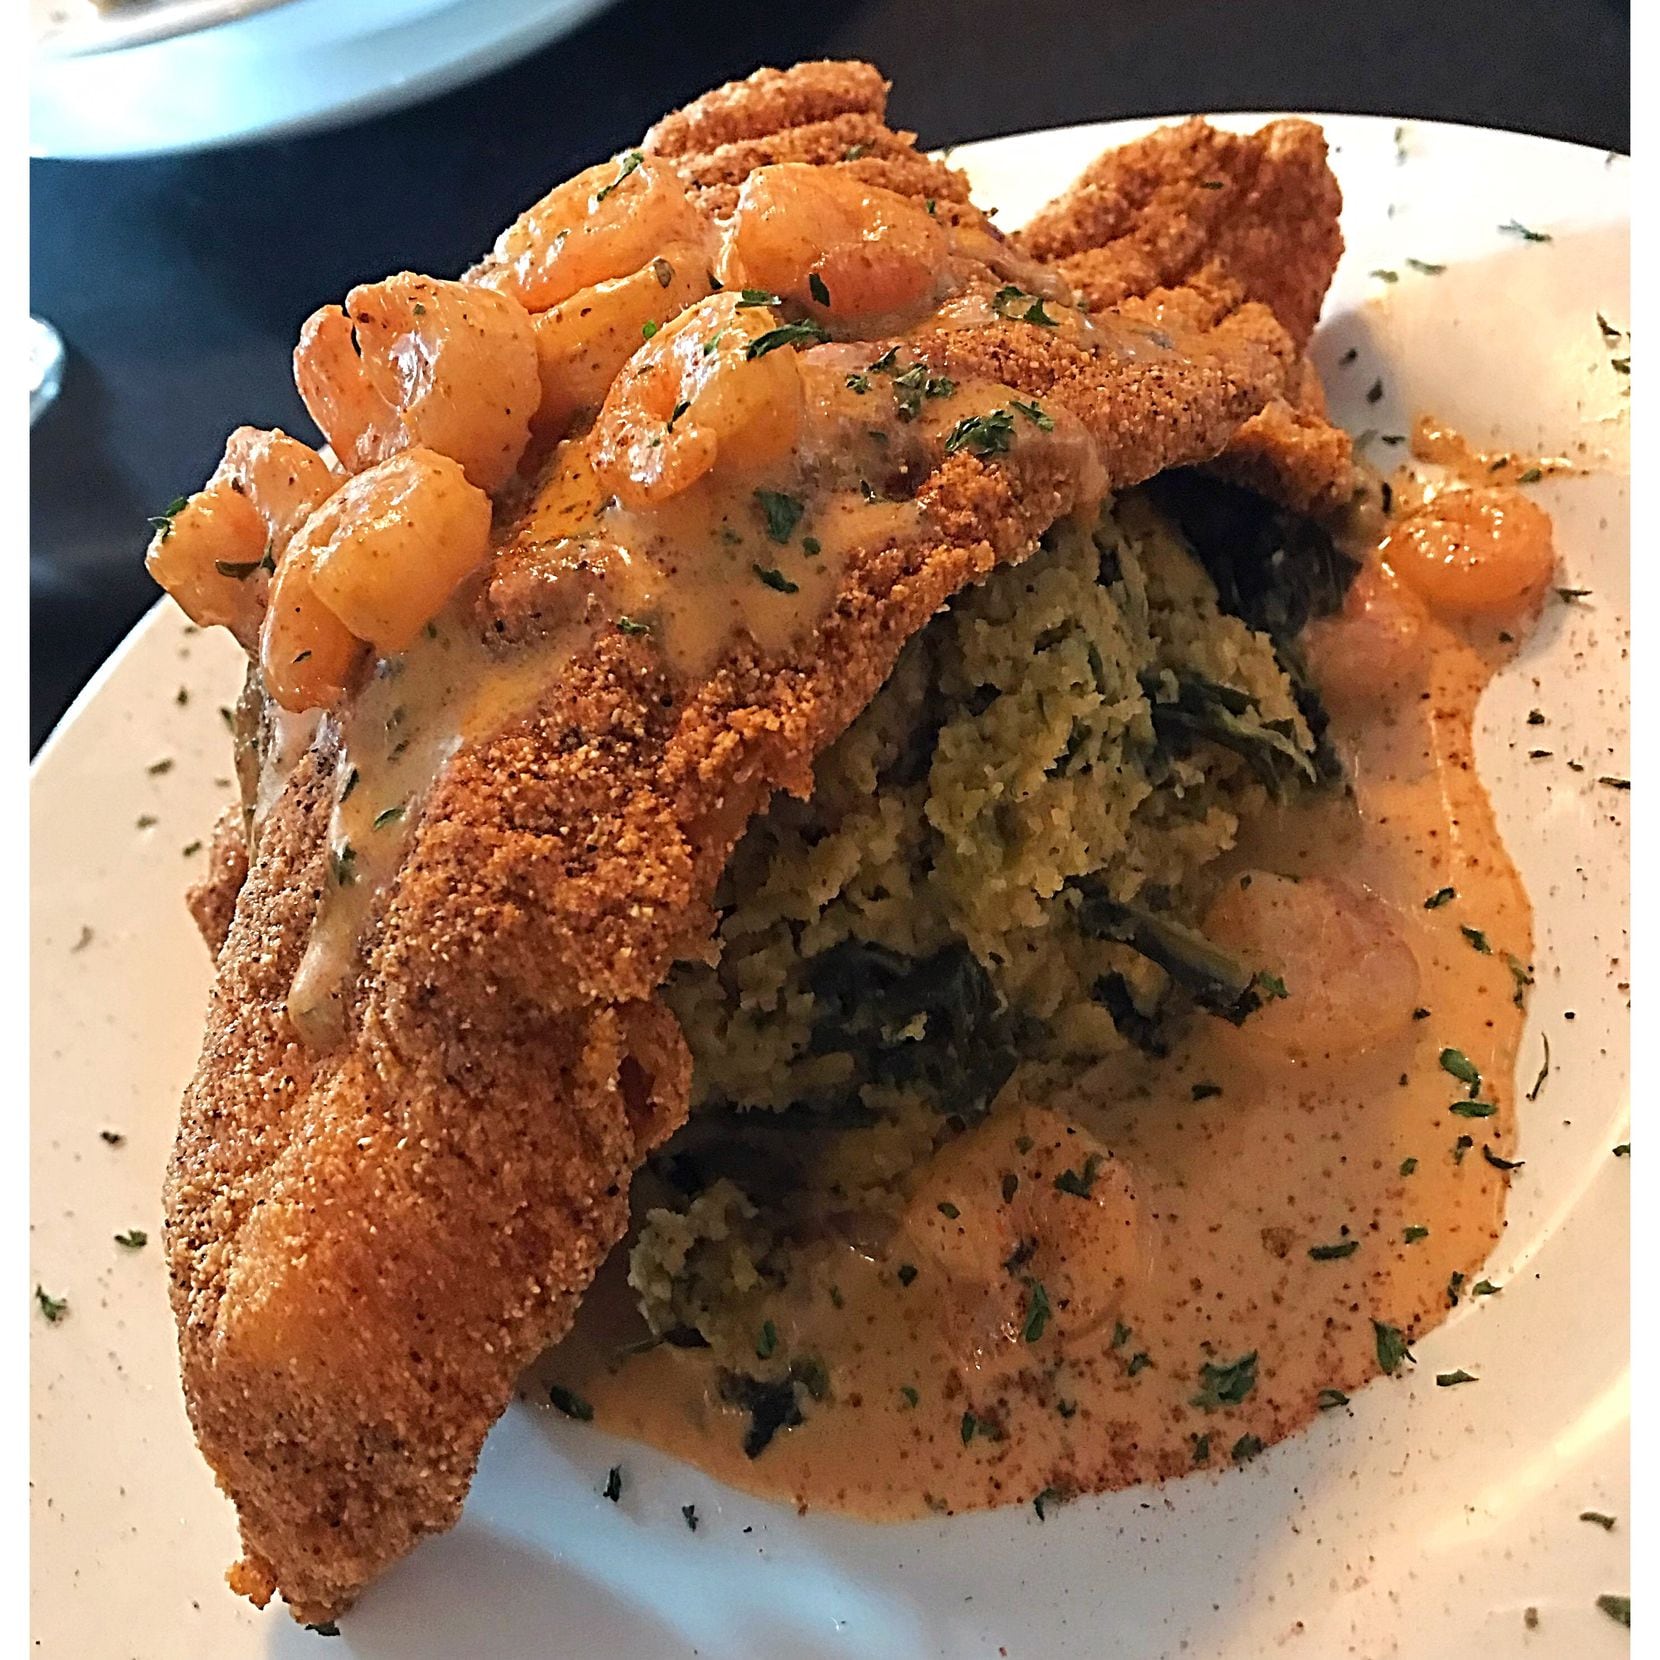 The "All Tyed Up" at Ten Eleven Grill features cornbread dressing, shrimp and deep-fried...